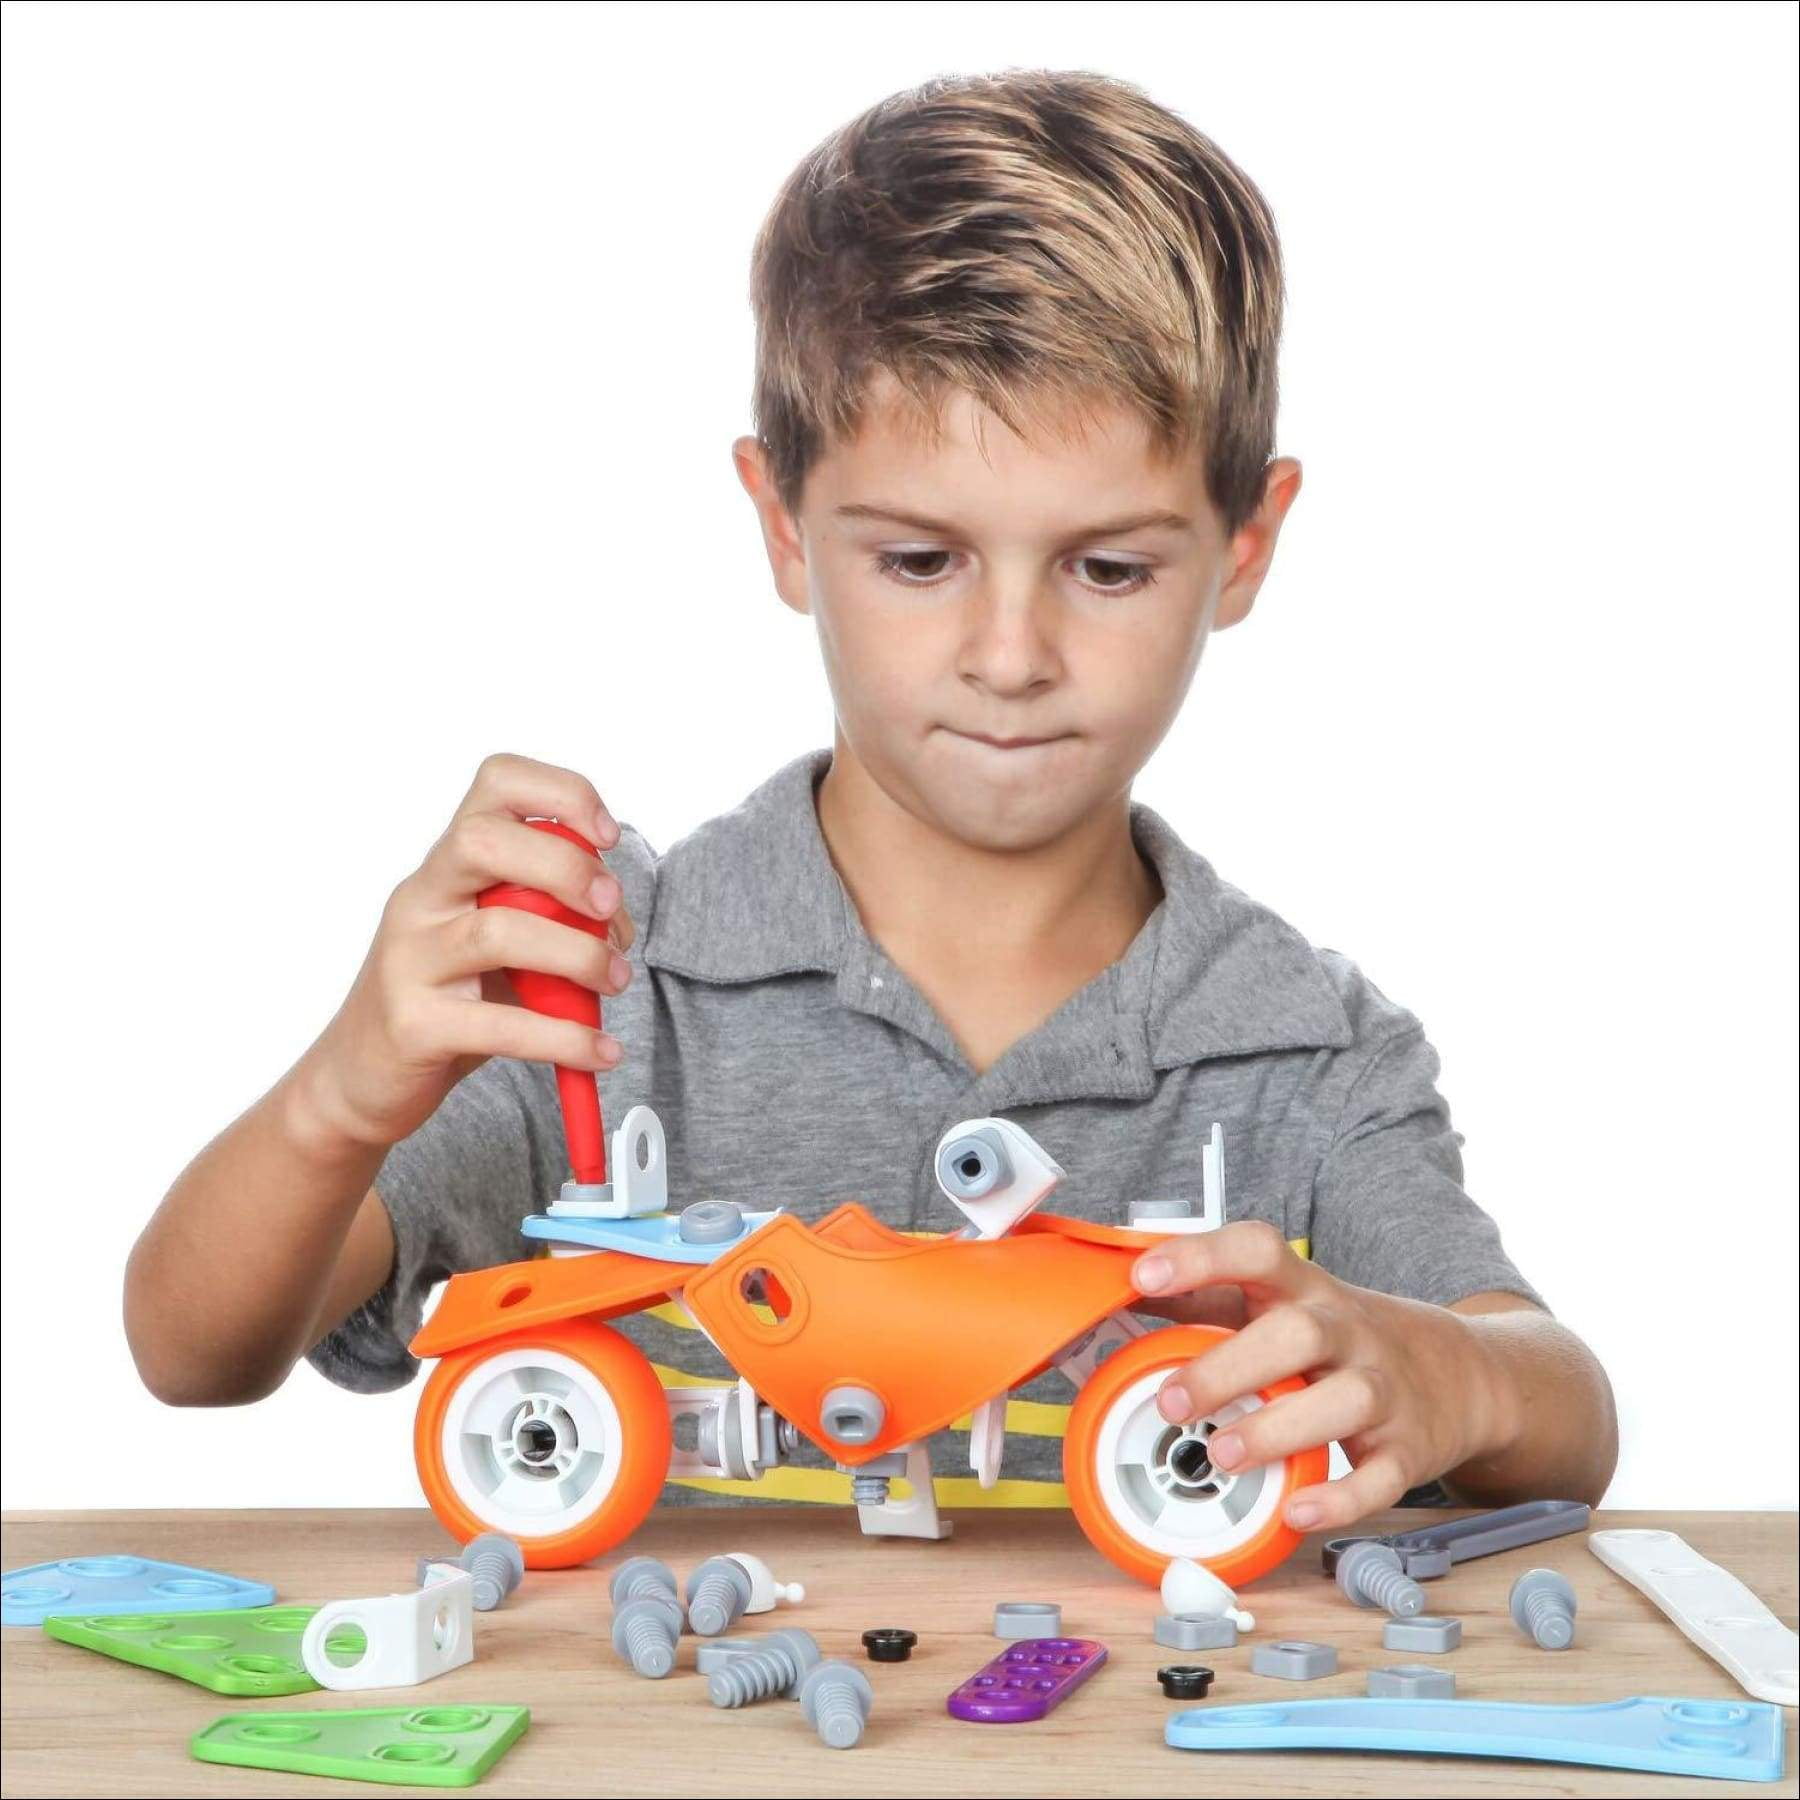 Shxx Building Toys For Boys Age 6-8 Year Old Boy Gift Best Educational Toys  For Kids 5-7 Stem Building Toy For Boys 8-12 Engineering Building Kit Toys